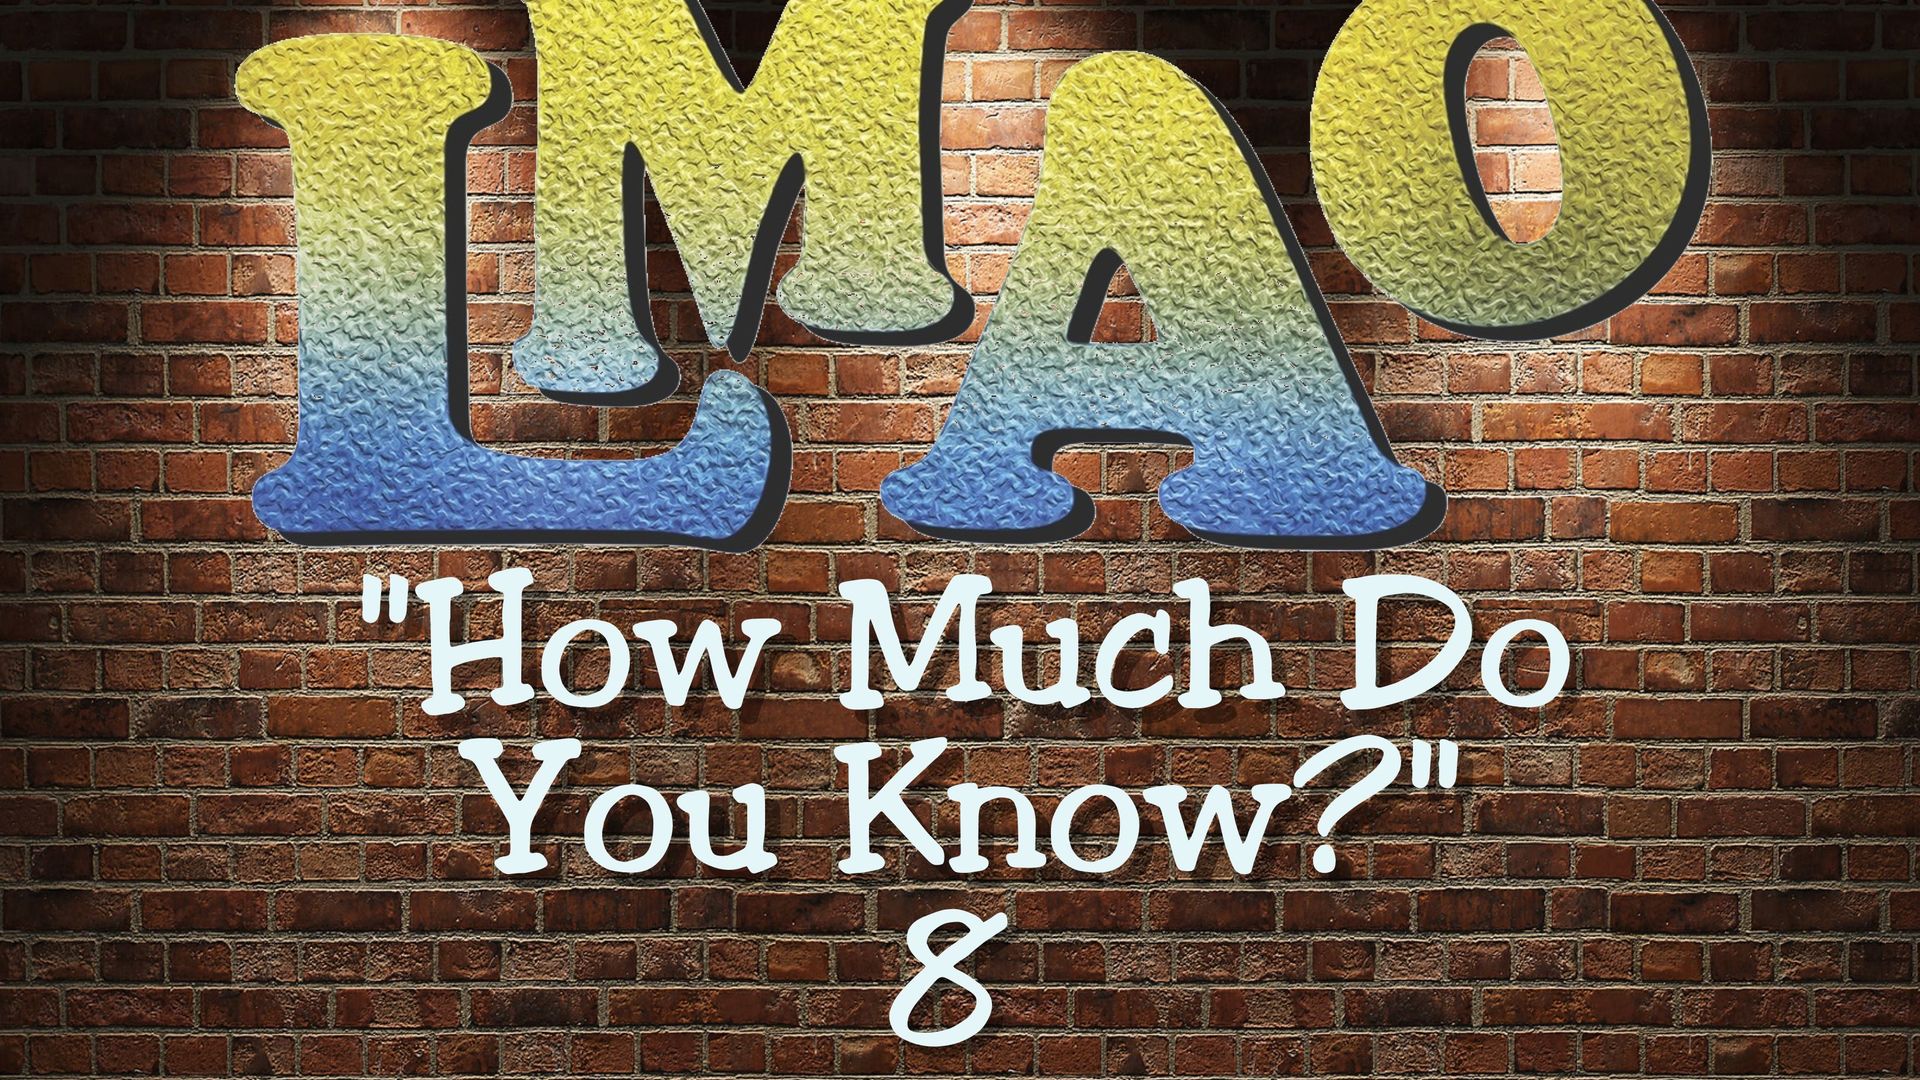 LMAO - How much do YOU know? 8